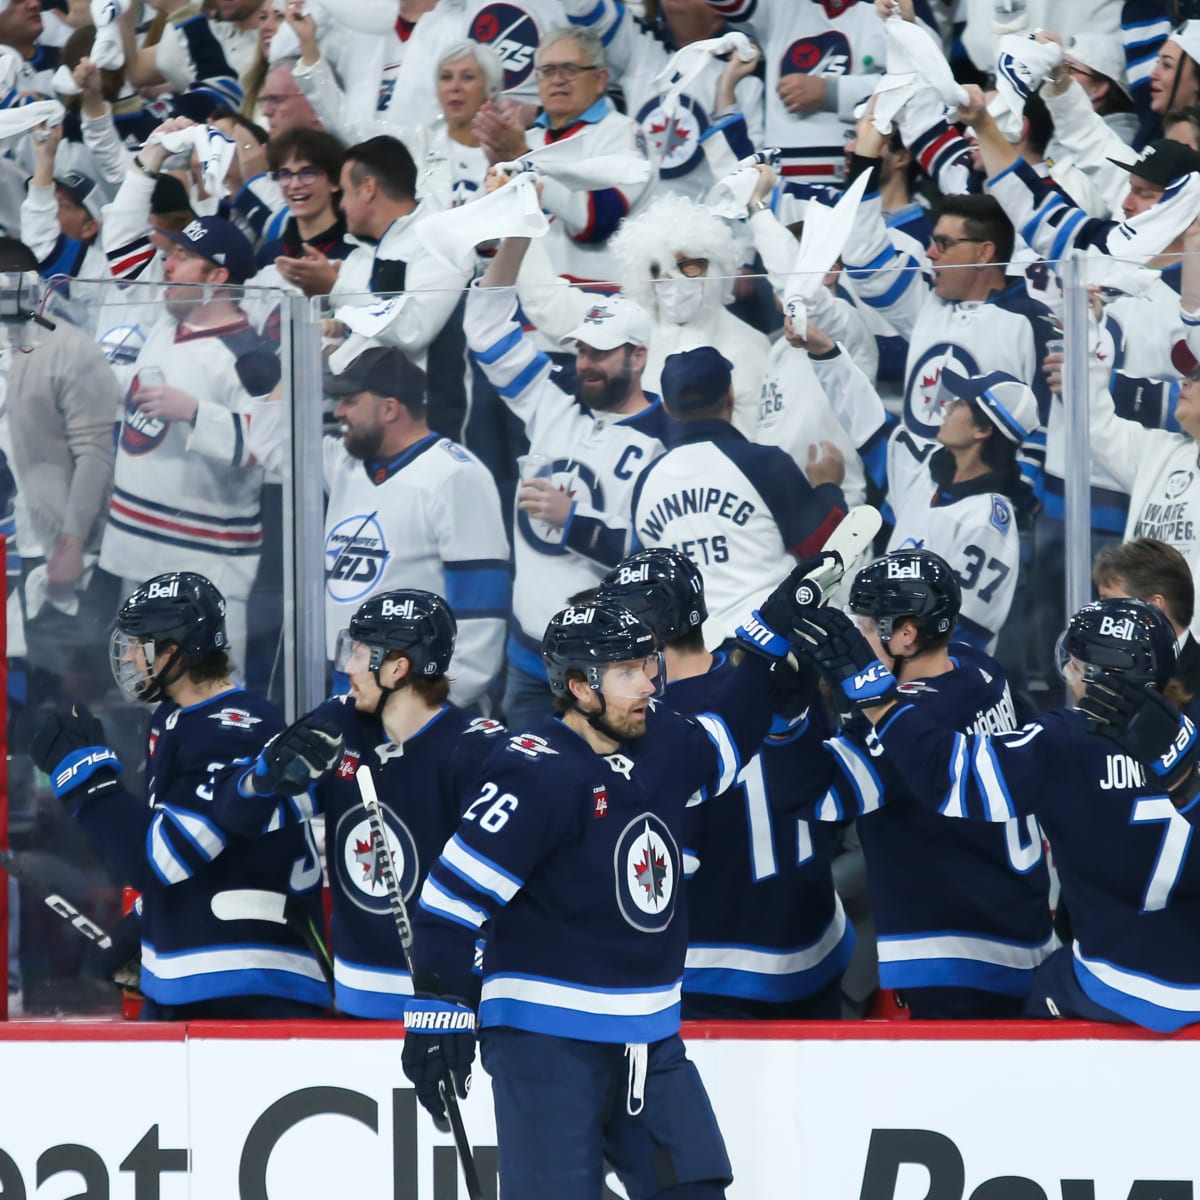 Winnipeg Jets win on the ice and in the stands with team's 1st